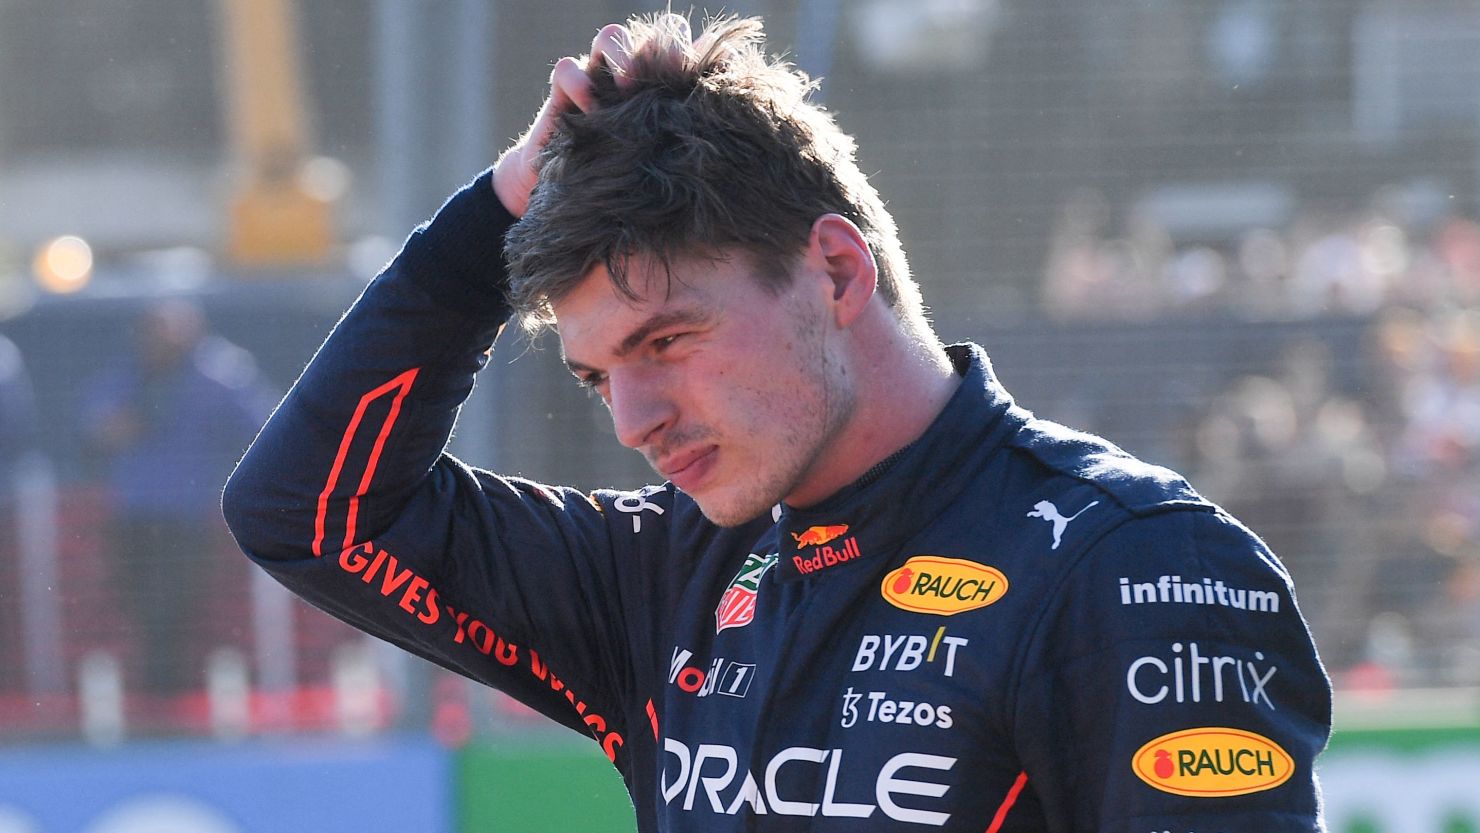 IT HAS HAPPENED AGAIN: Max Verstappen is in tears over the loss of his precious father Jos Verstappen due to…